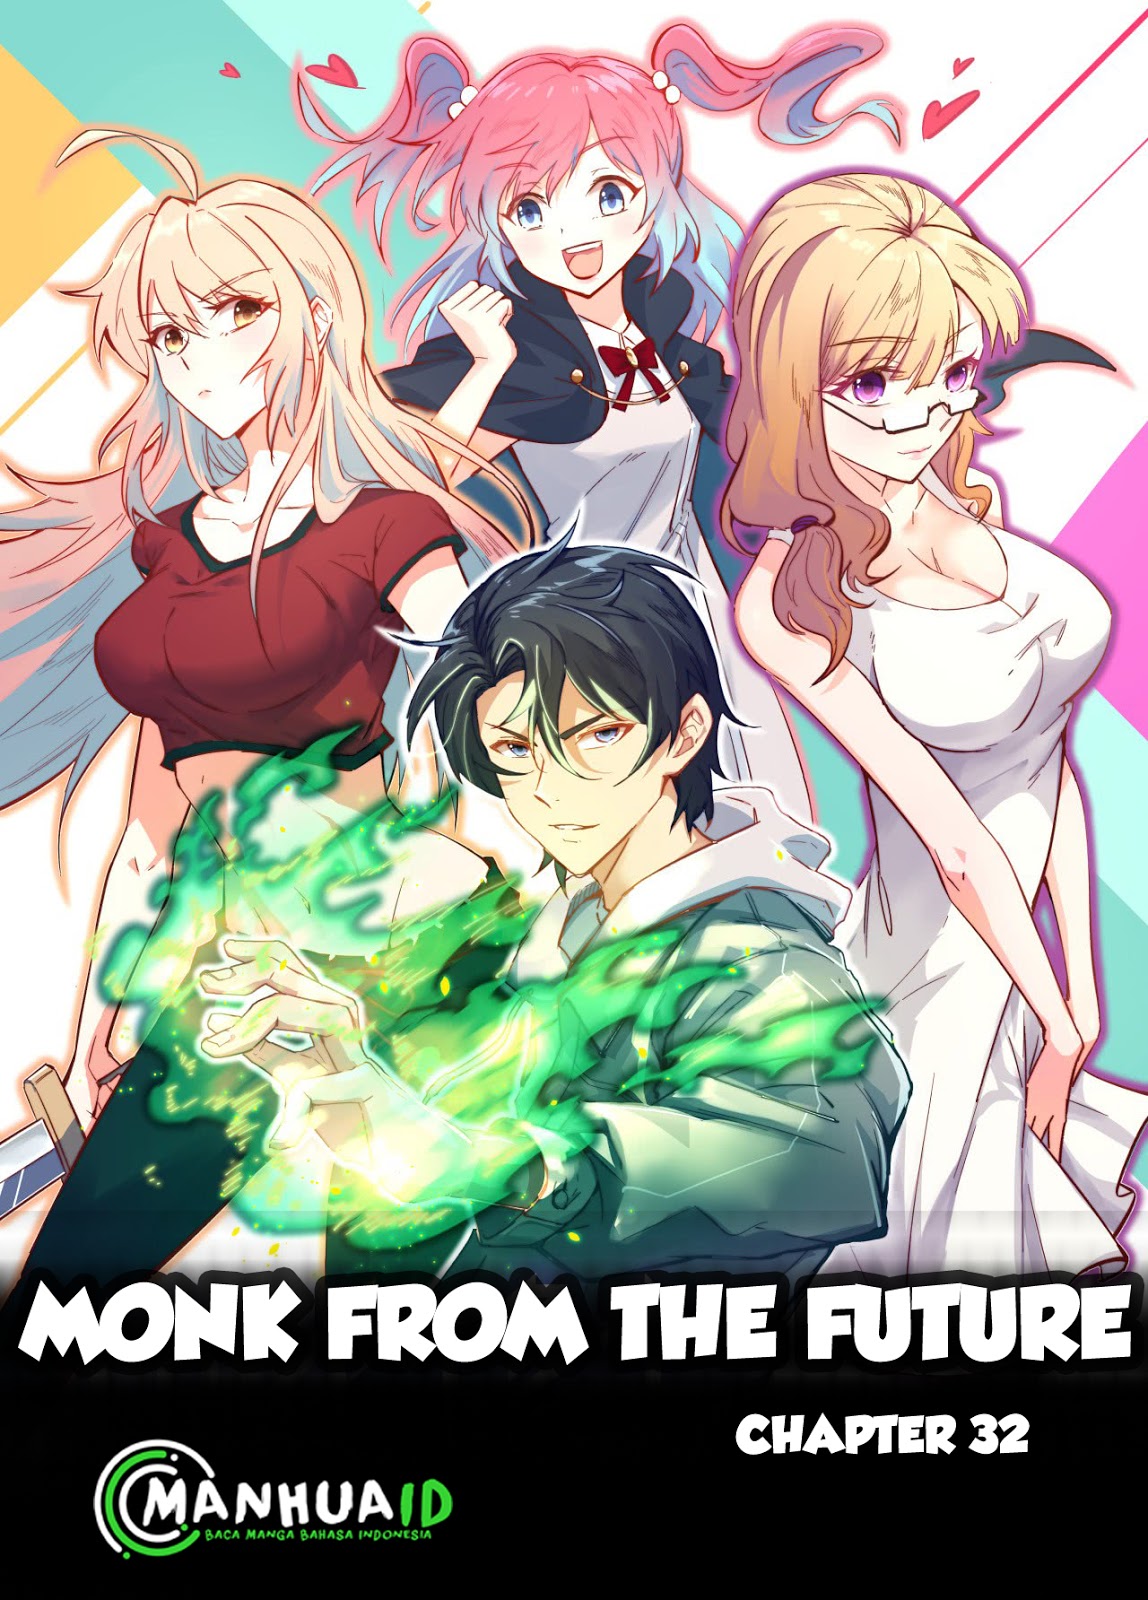 Monk From the Future Chapter 32